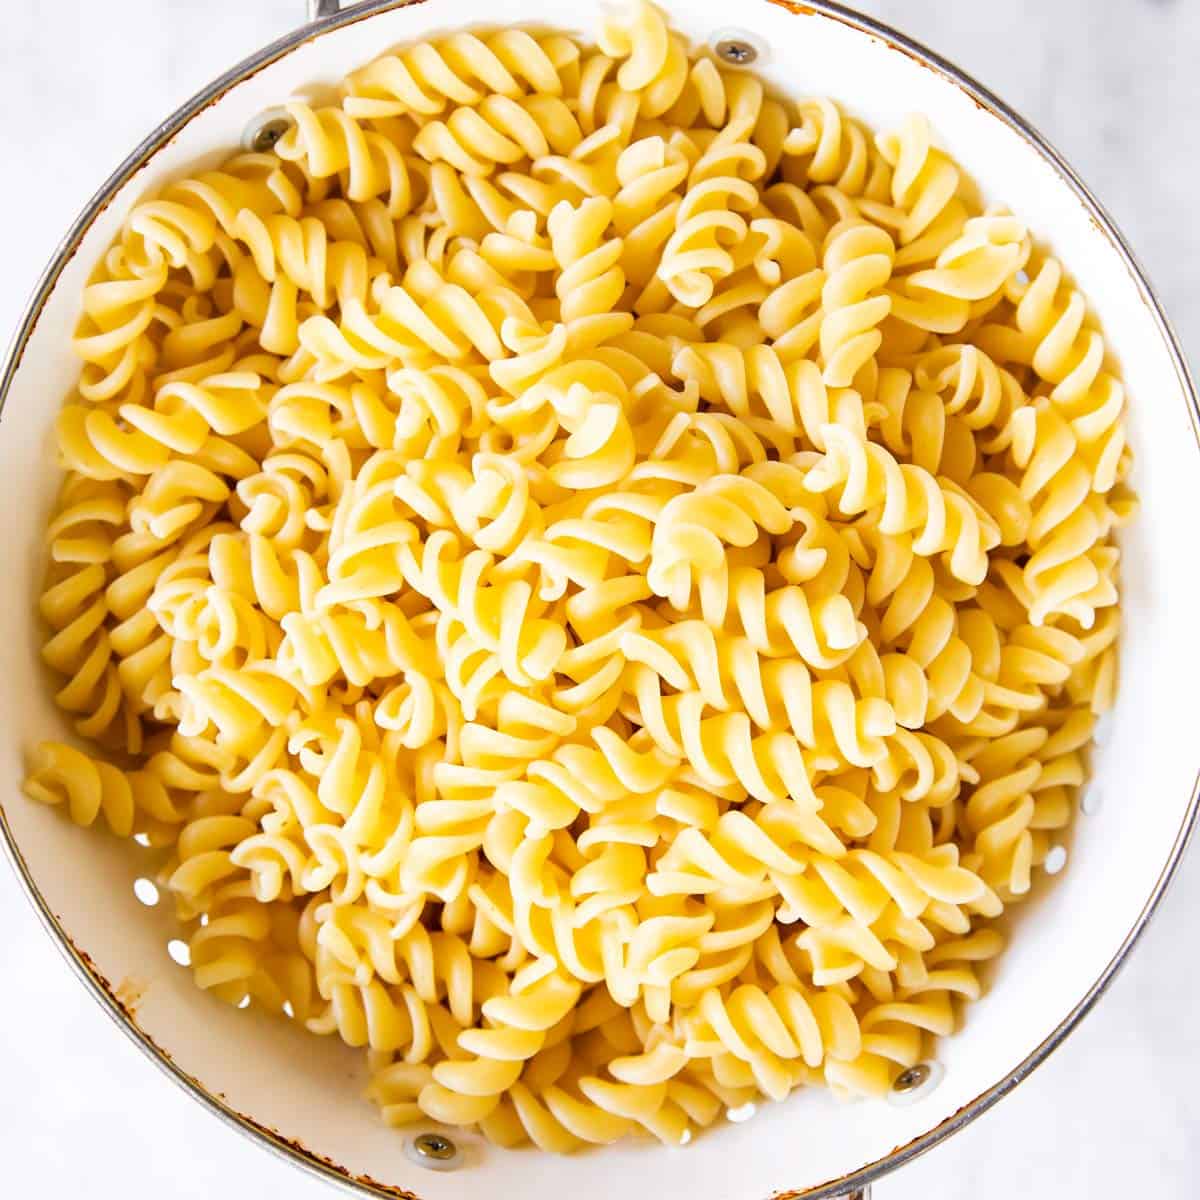 https://www.savorynothings.com/wp-content/uploads/2021/04/how-to-cook-pasta-image-sq.jpg